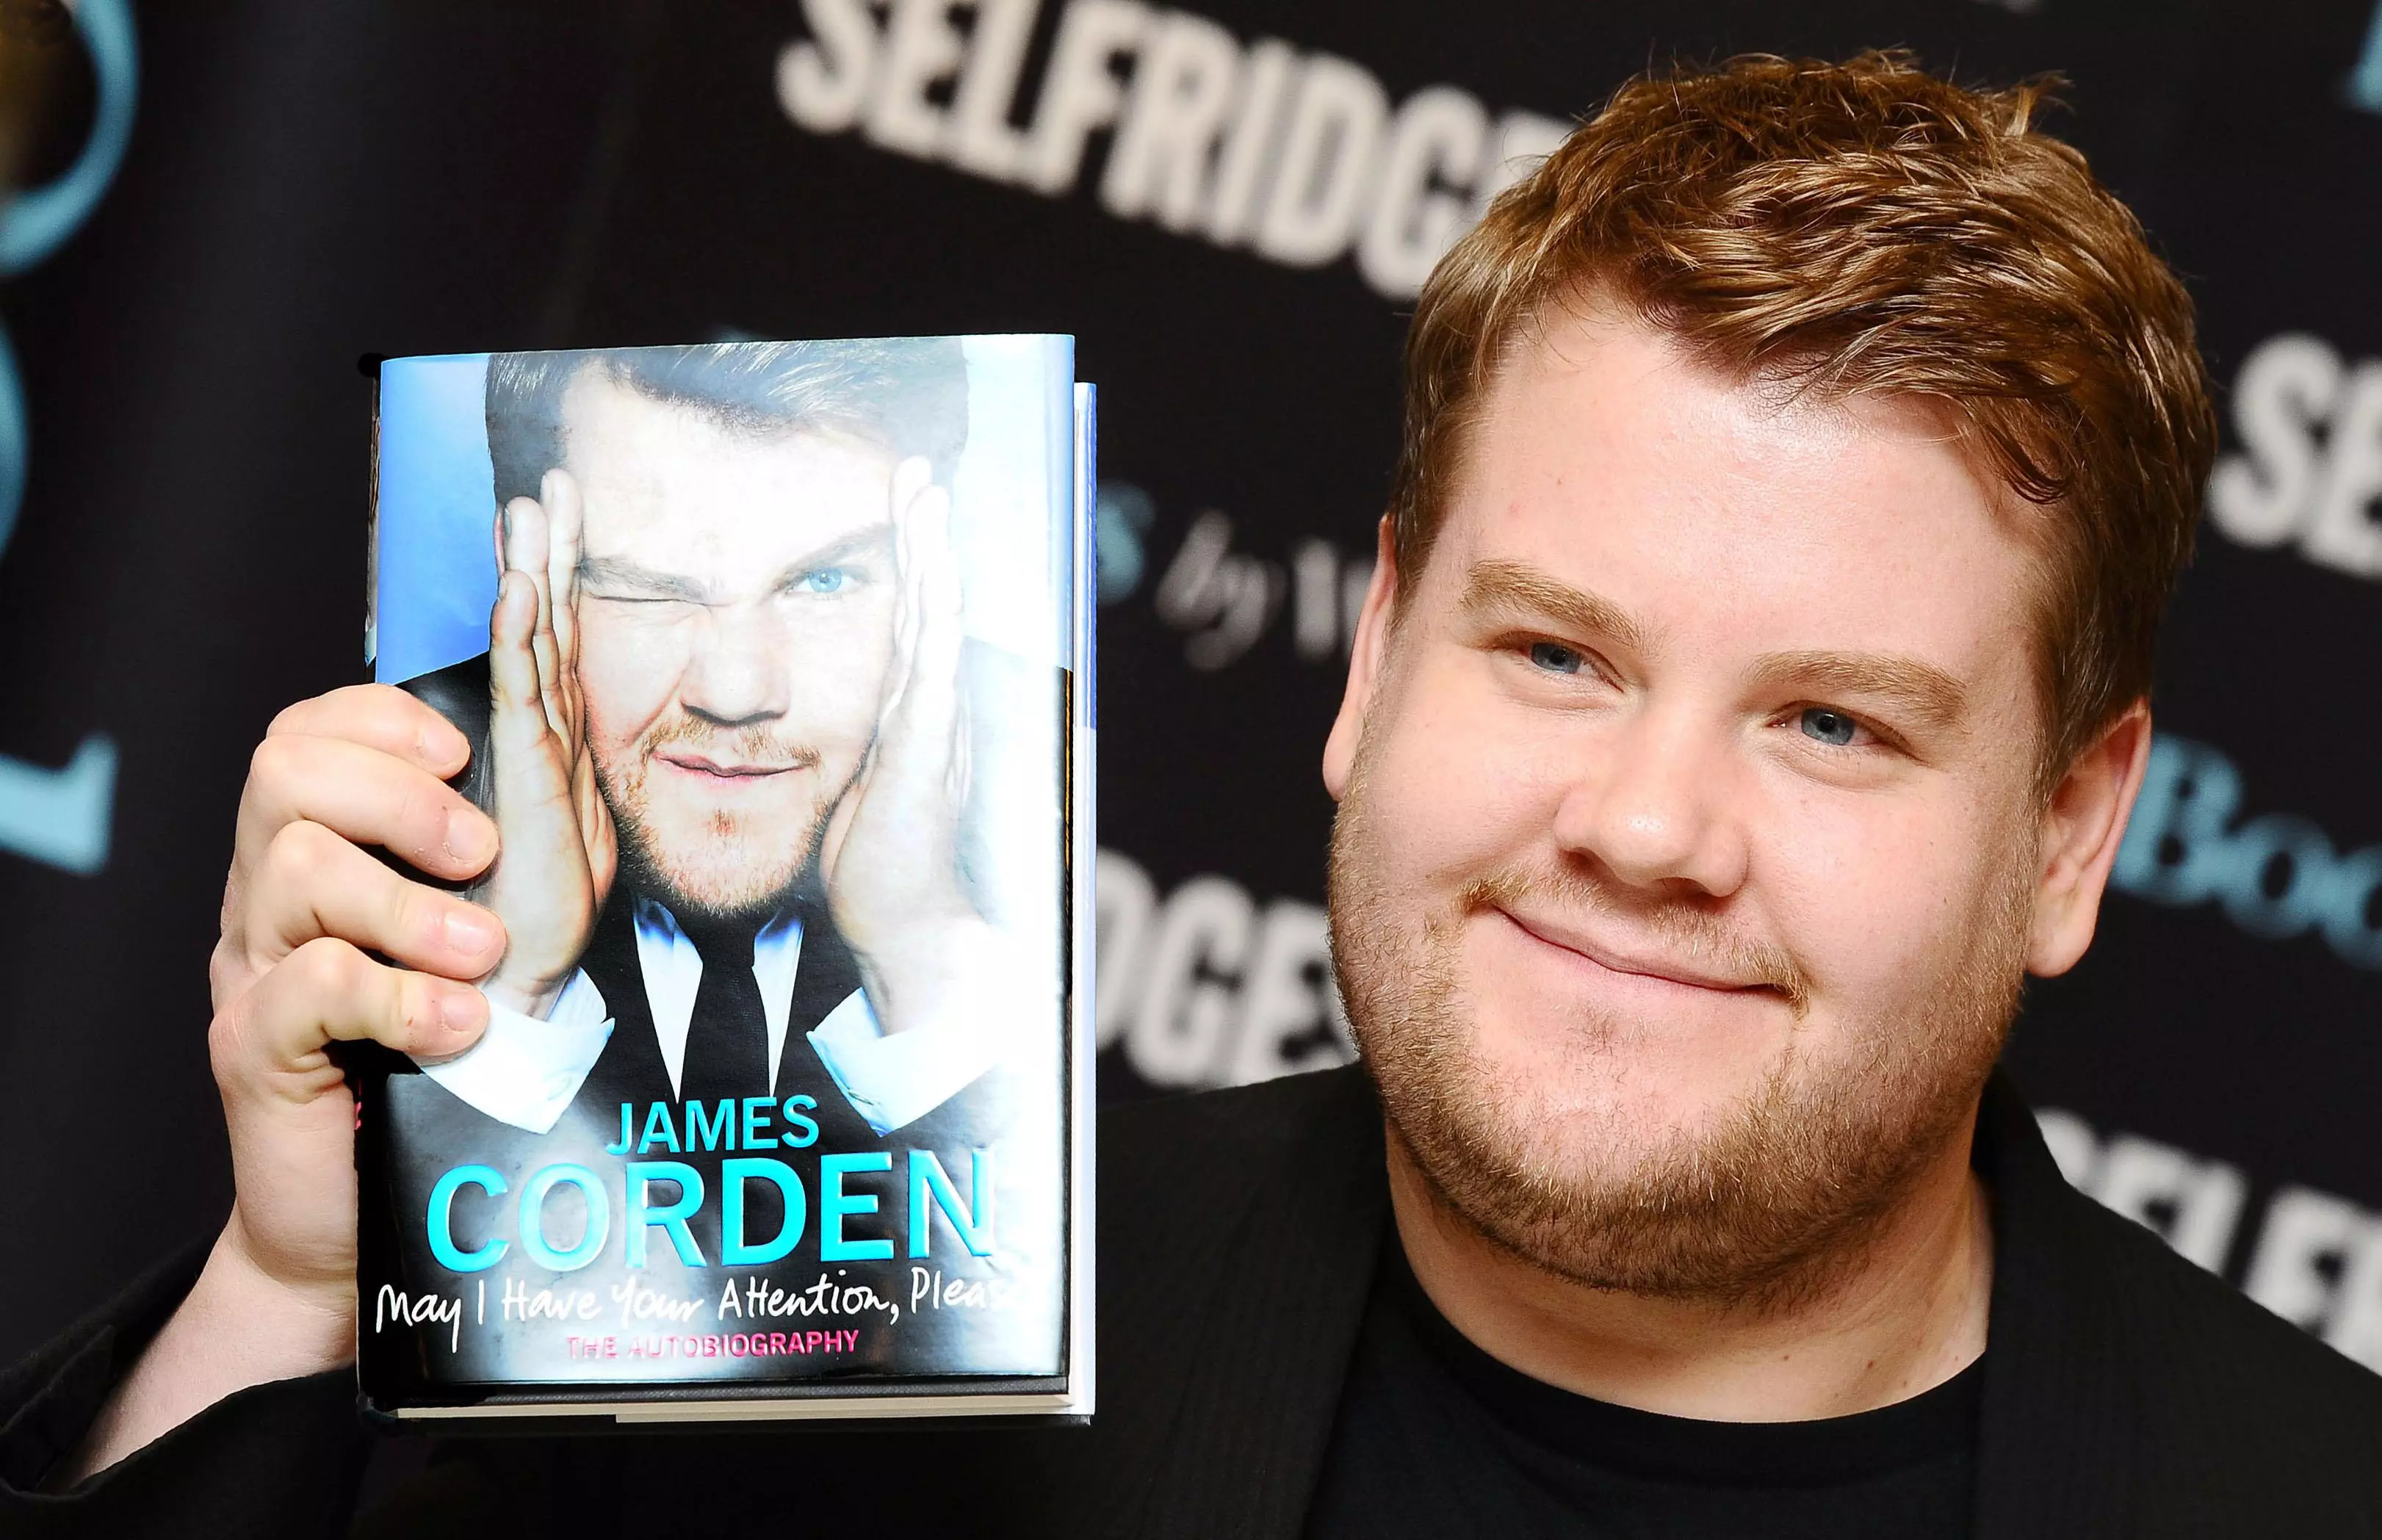 James Corden with his understated autobiography.